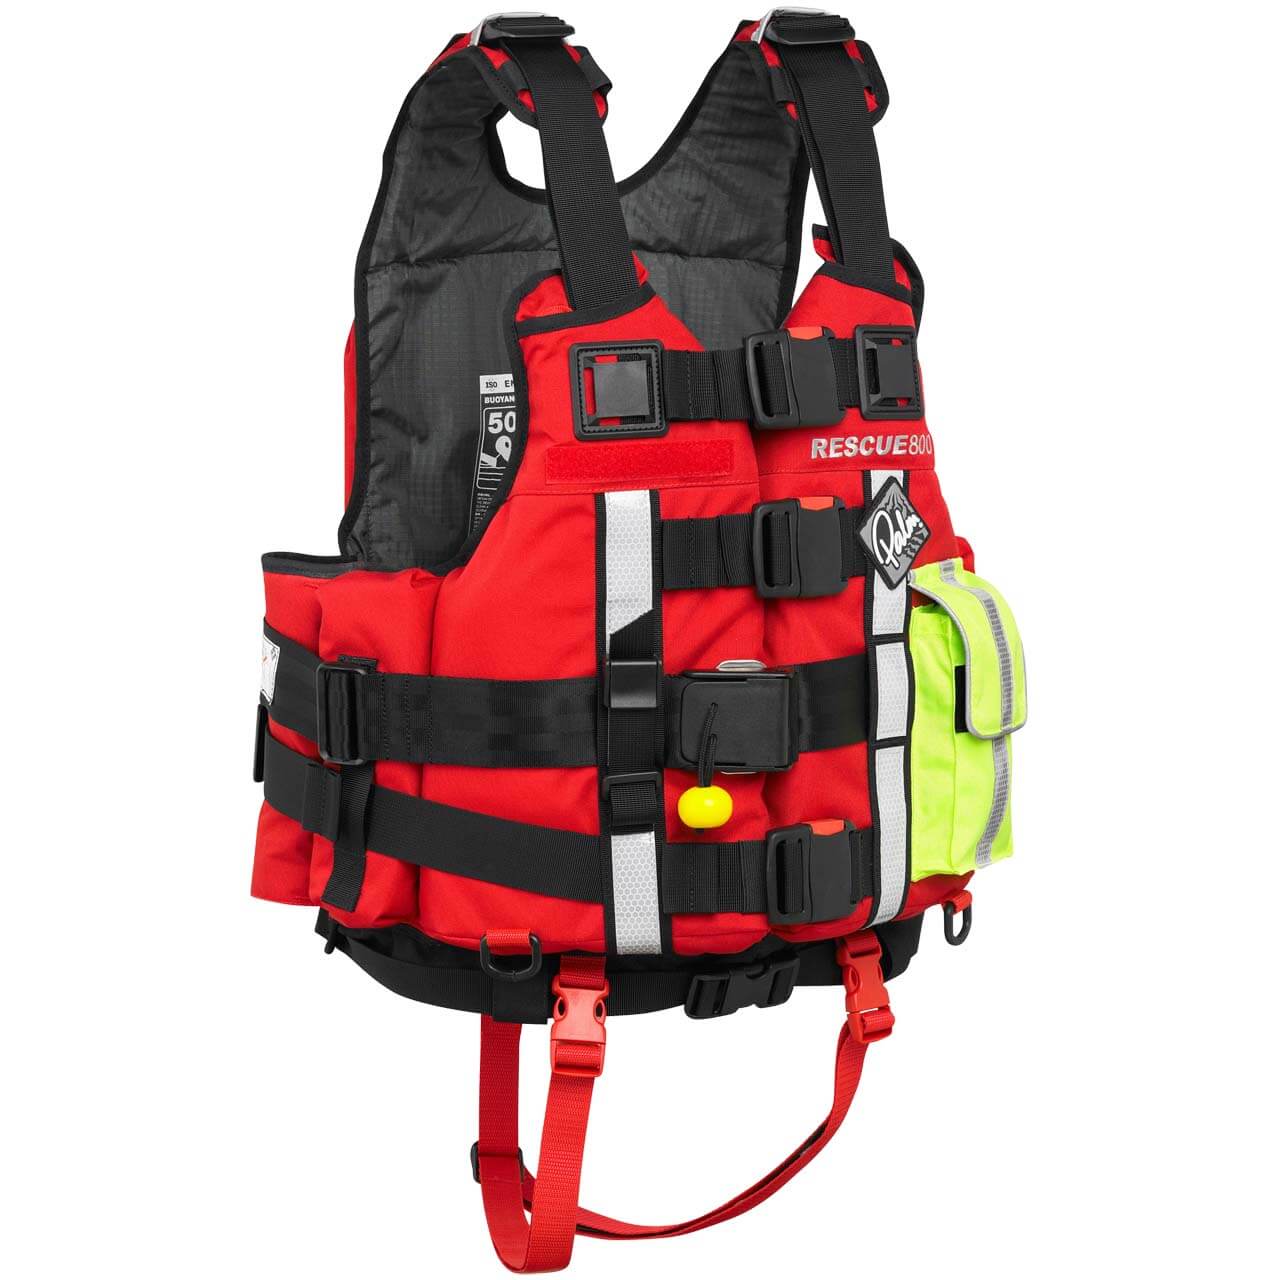 Palm Rescue 800 PFD - Red, XS/S